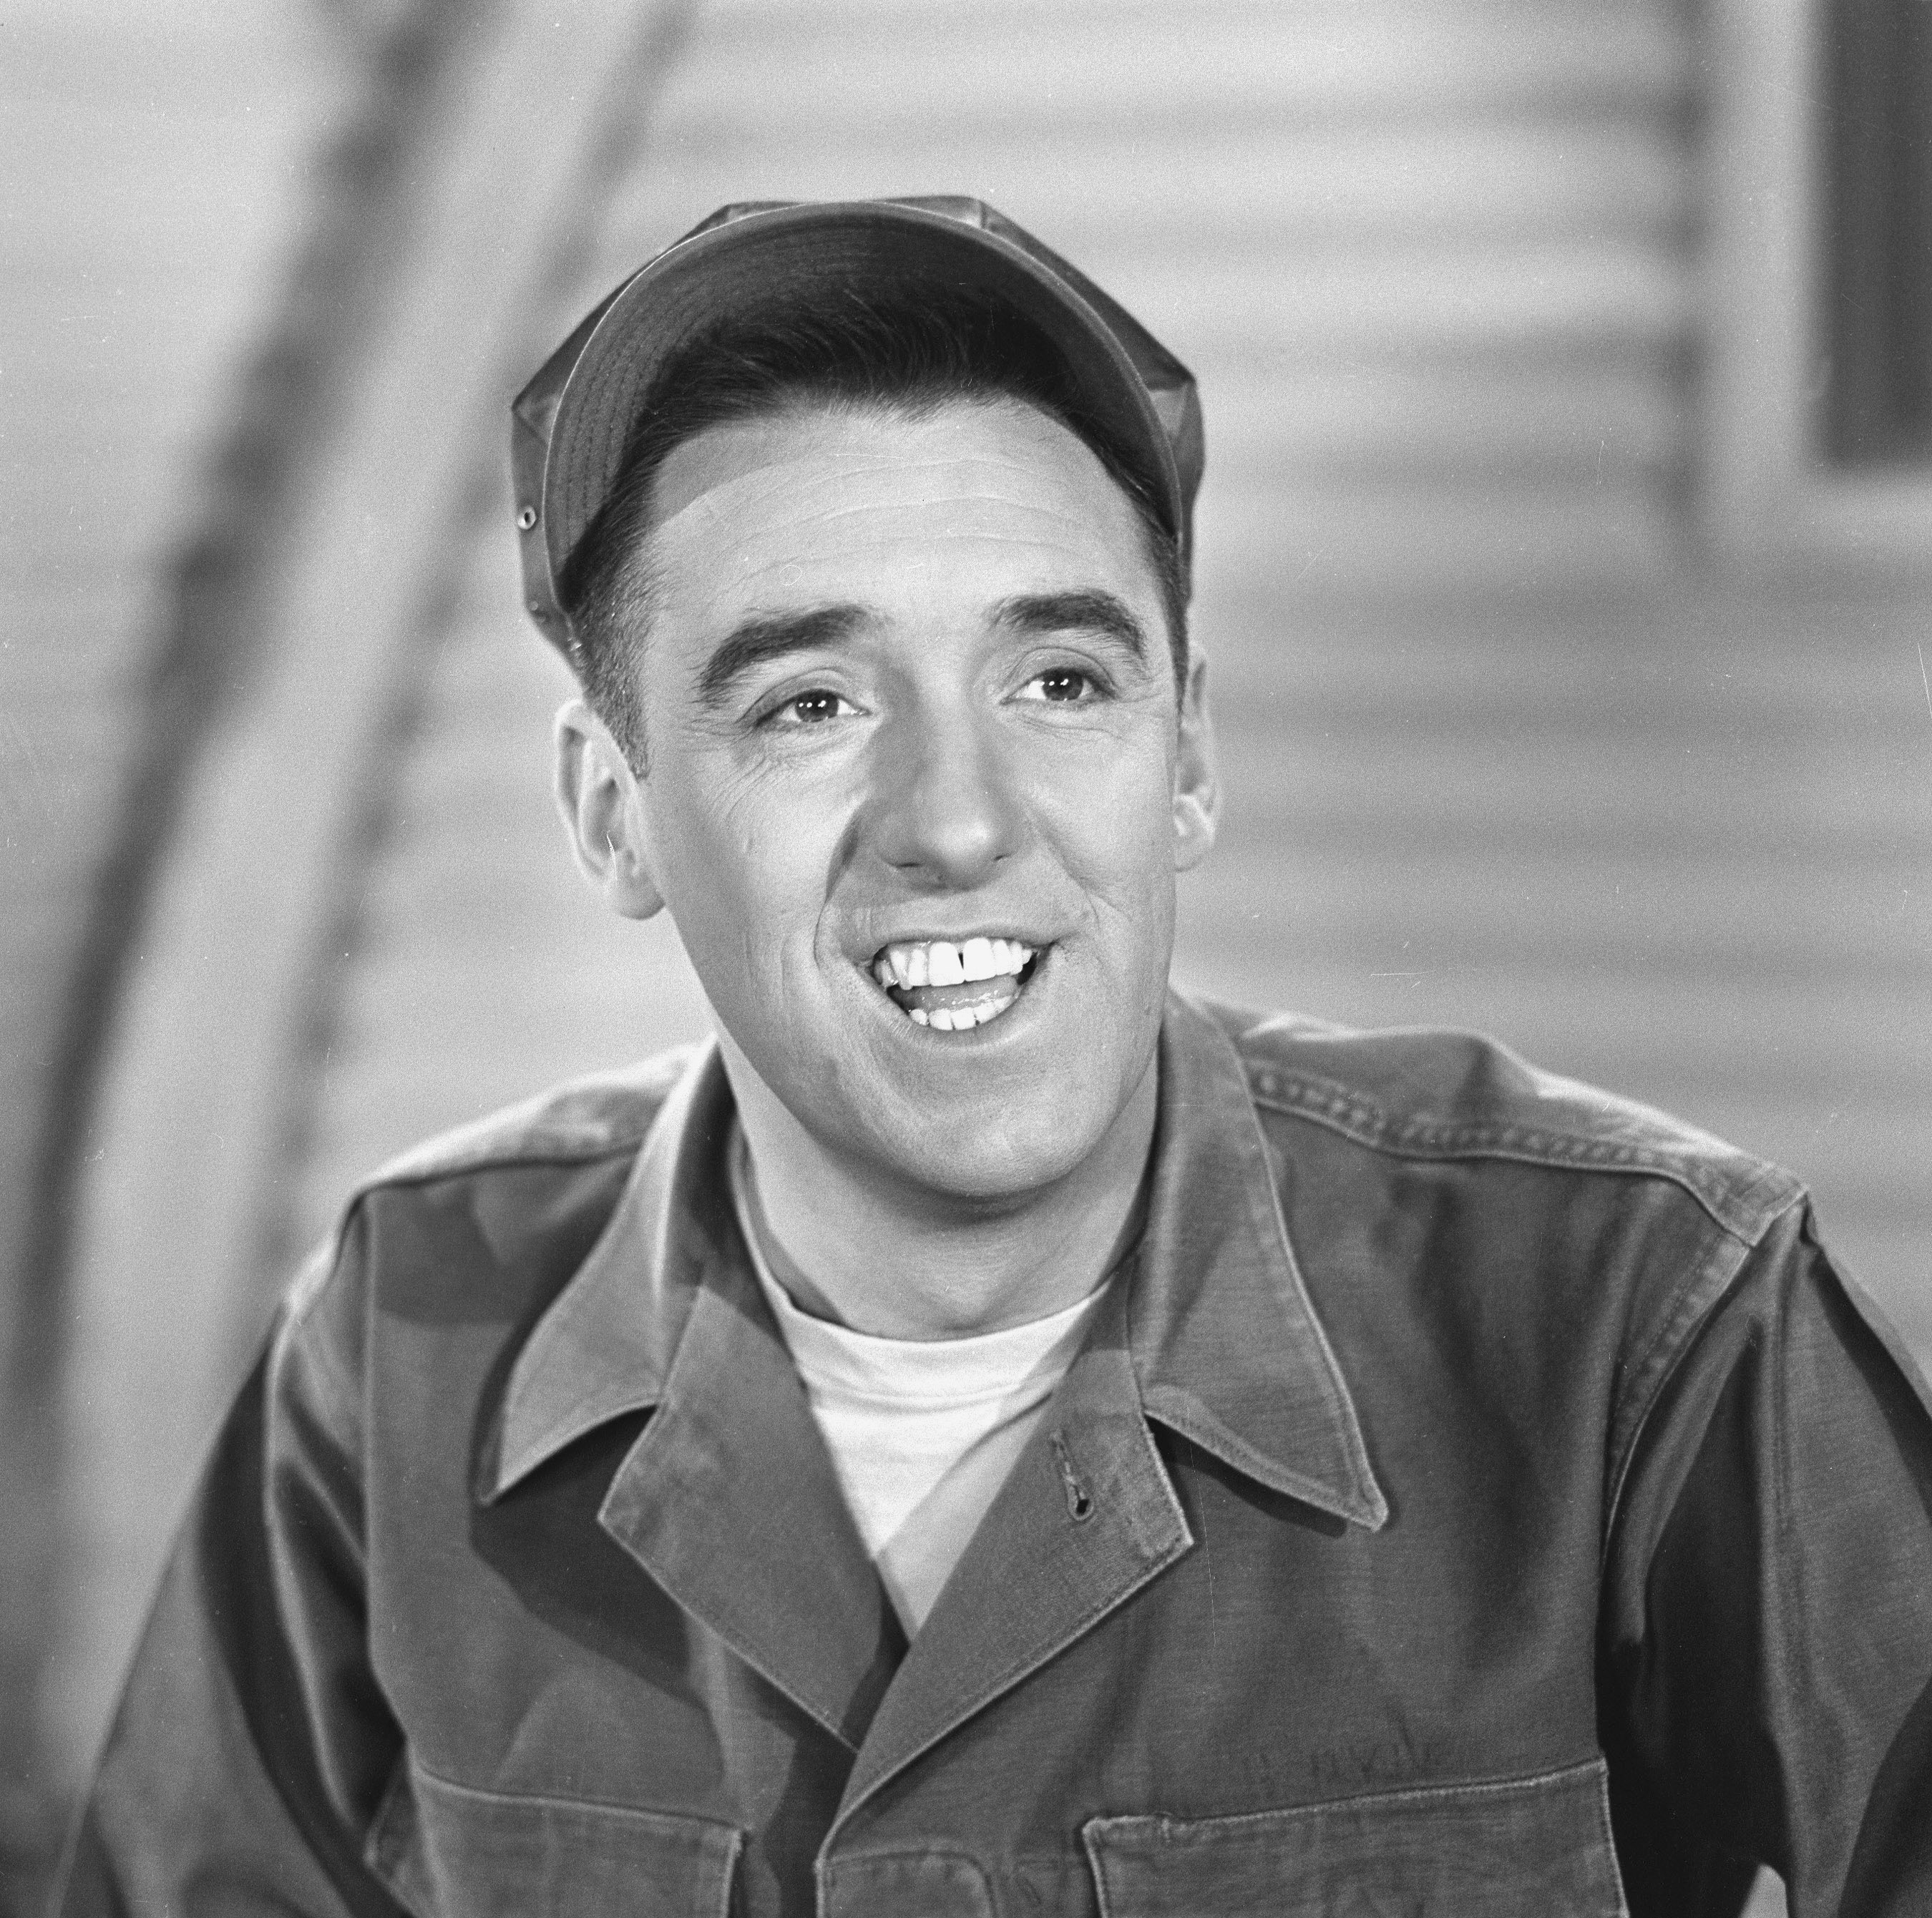 Gomer Pyle actor Jim Nabors was called a 'complete Jekyll and Hyde' by an 'Andy Griffith Show' director.